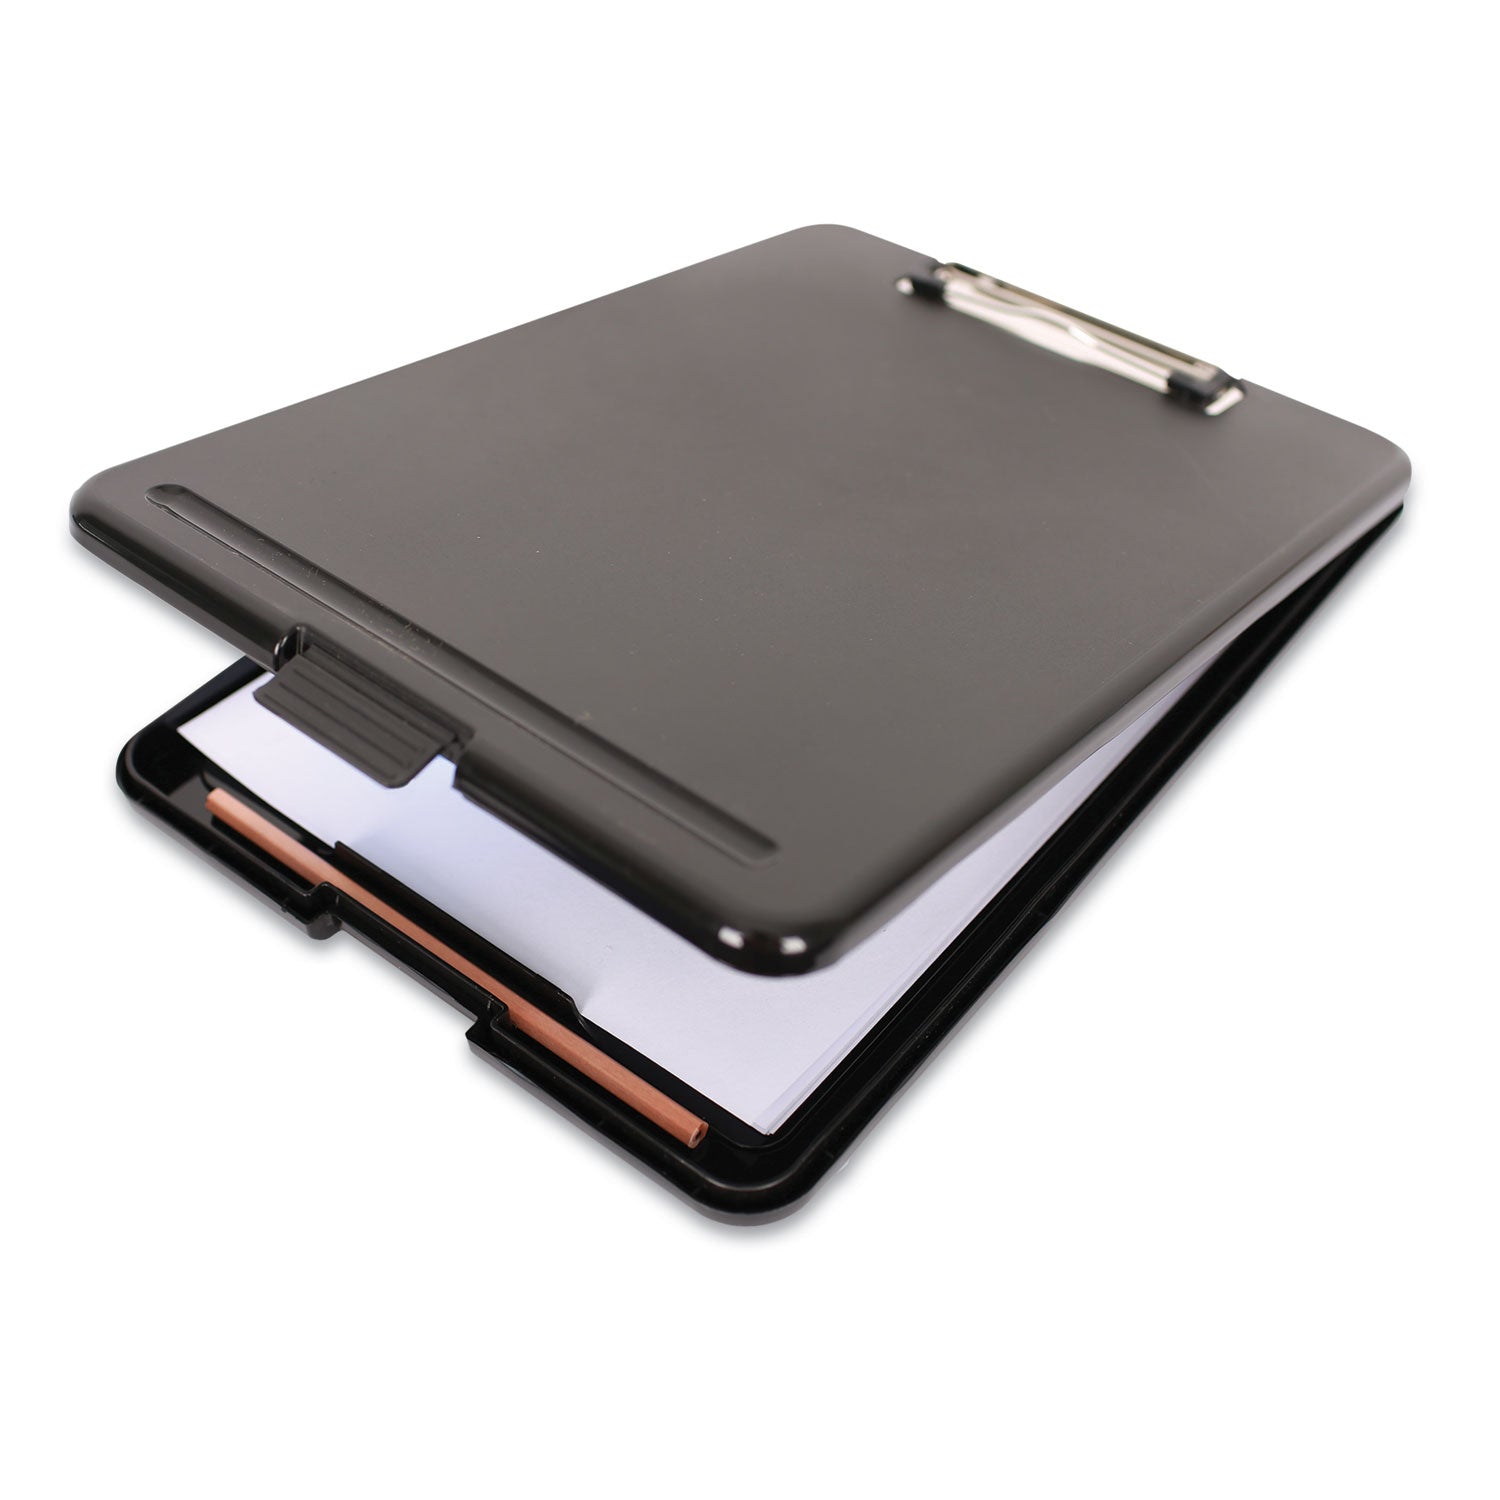 storage-clipboard-05-clip-capacity-holds-85-x-11-sheets-black_unv40318 - 2